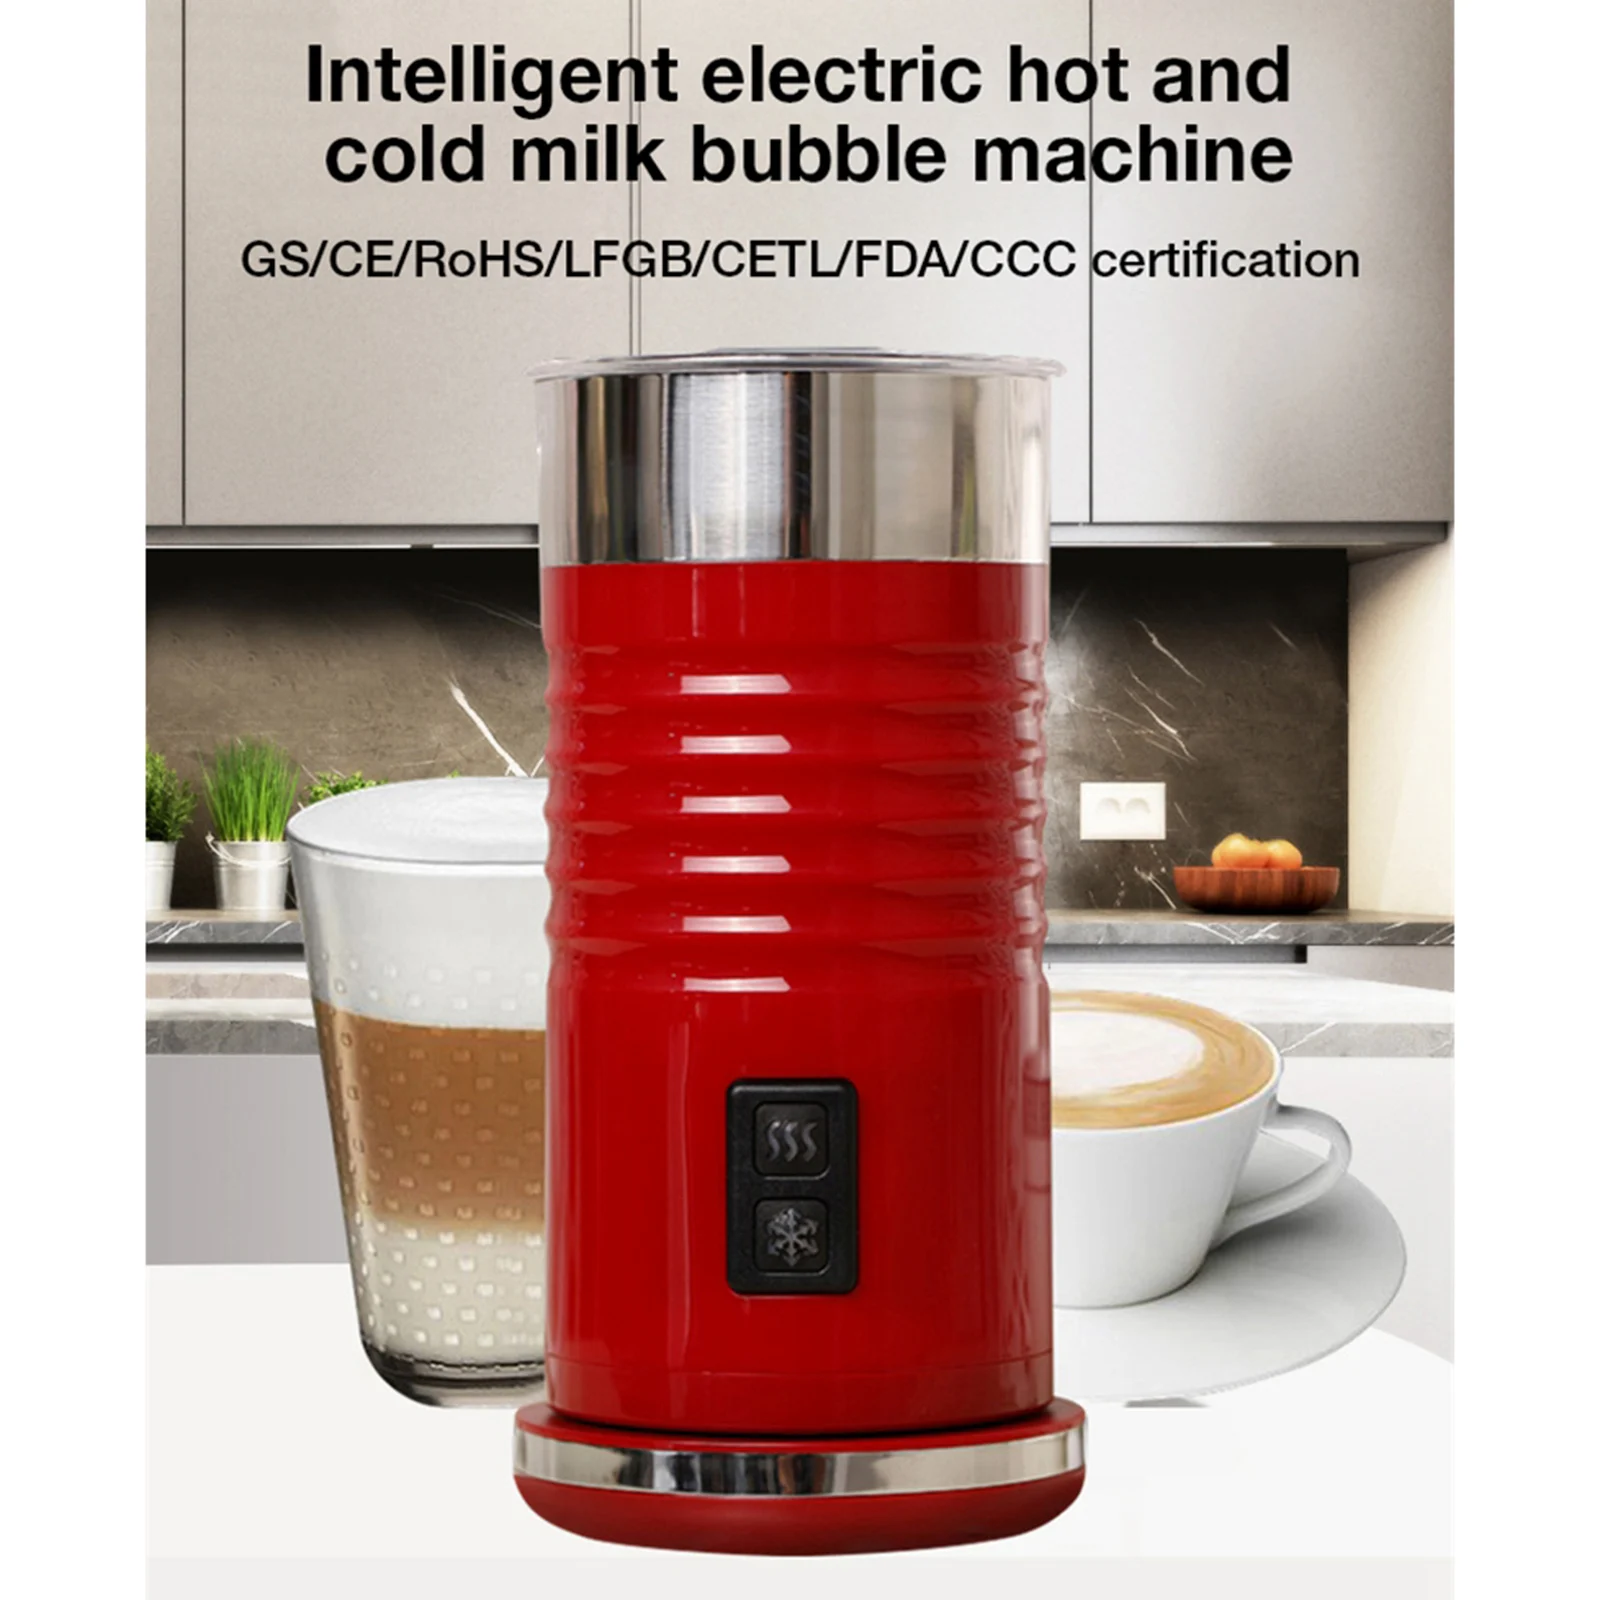 Stainless Steel Electric Milk Frother Hot Cold Foam Maker Milk Warmer for Latte Art EU Plug 2021 New